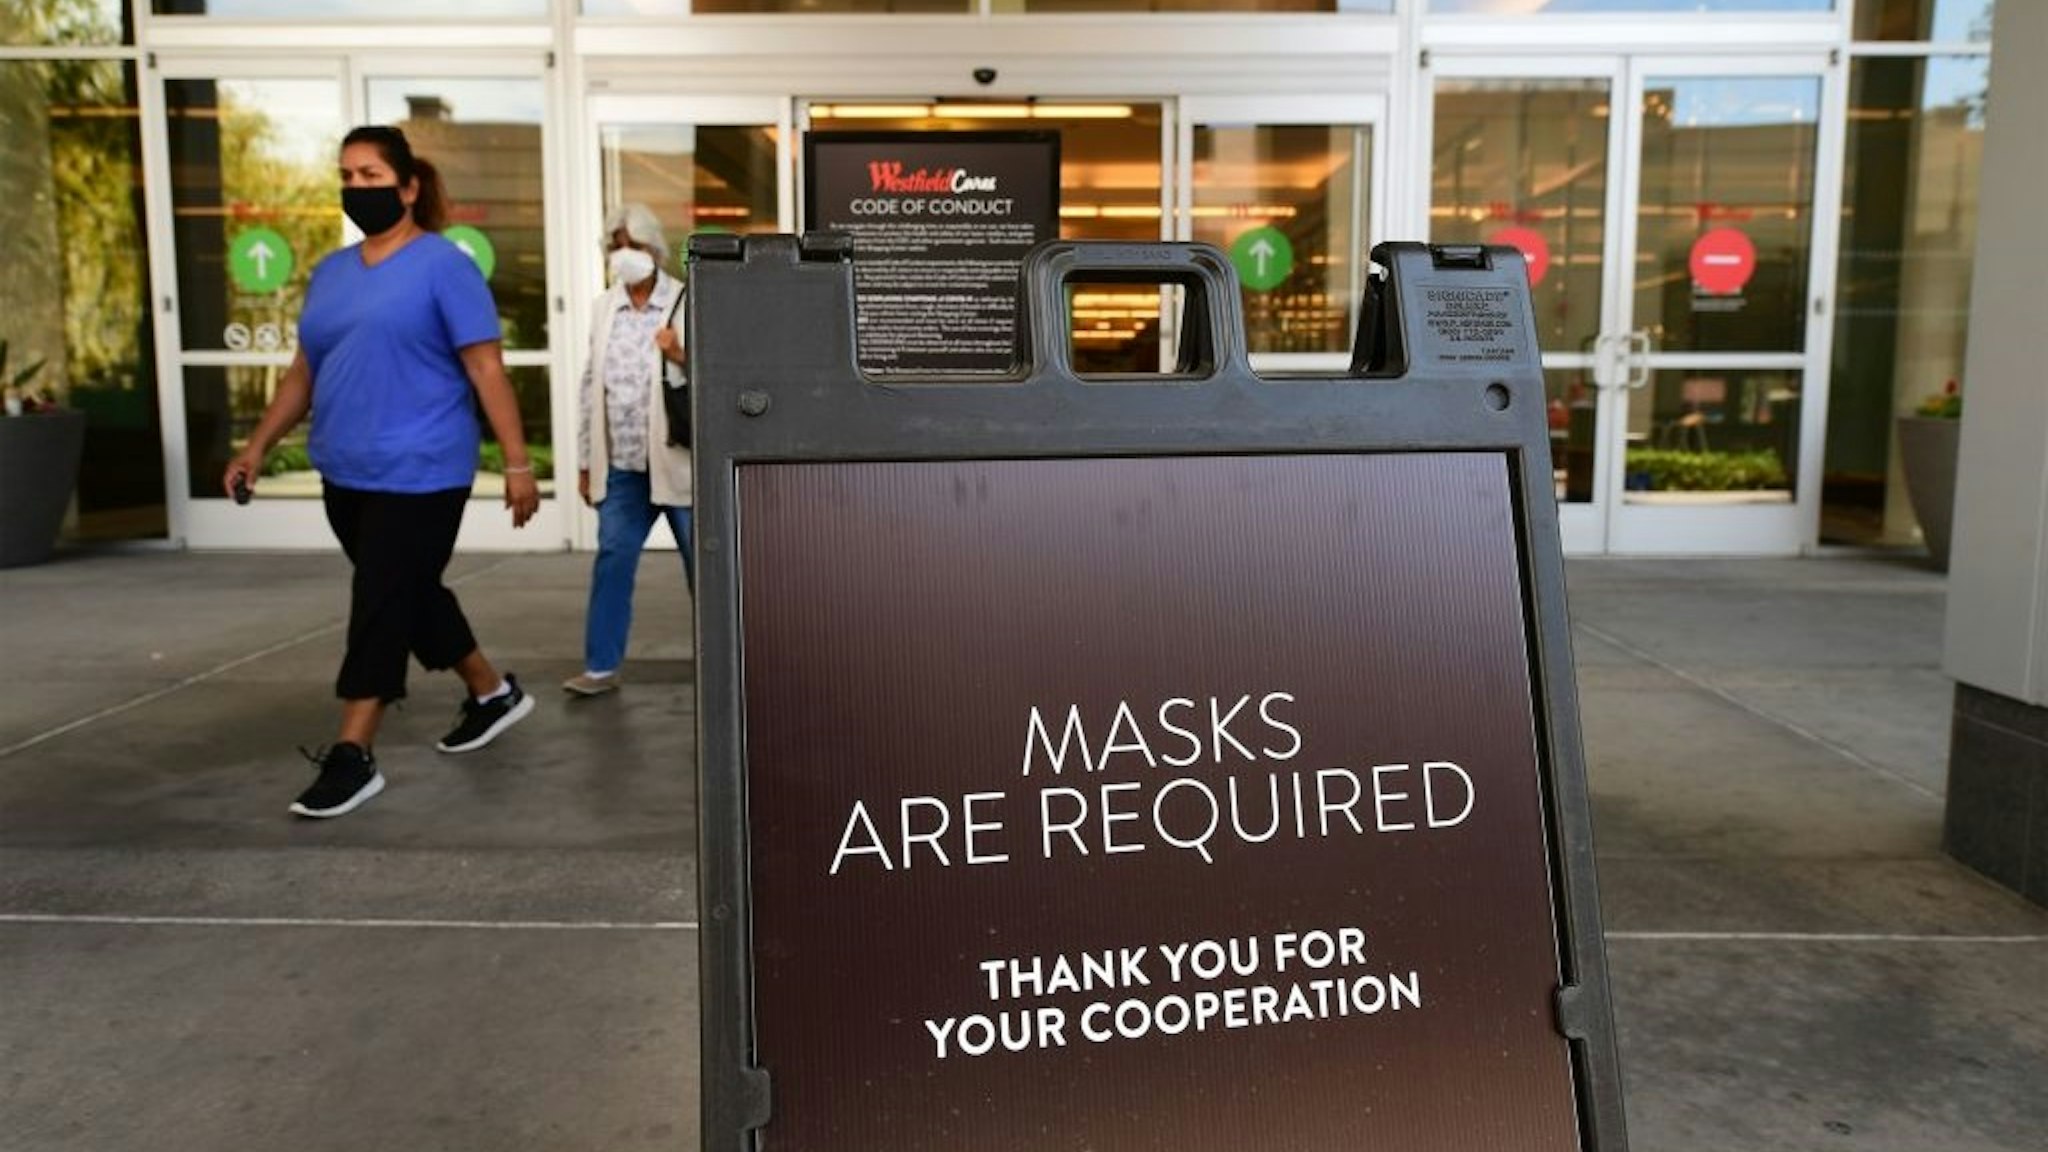 Women wearing facemasks exit a shopping mall where a sign is posted at an entrance reminding people of the mask requirement Westfield Santa Anita shopping mall on June 12, 2020 in Arcadia, California.